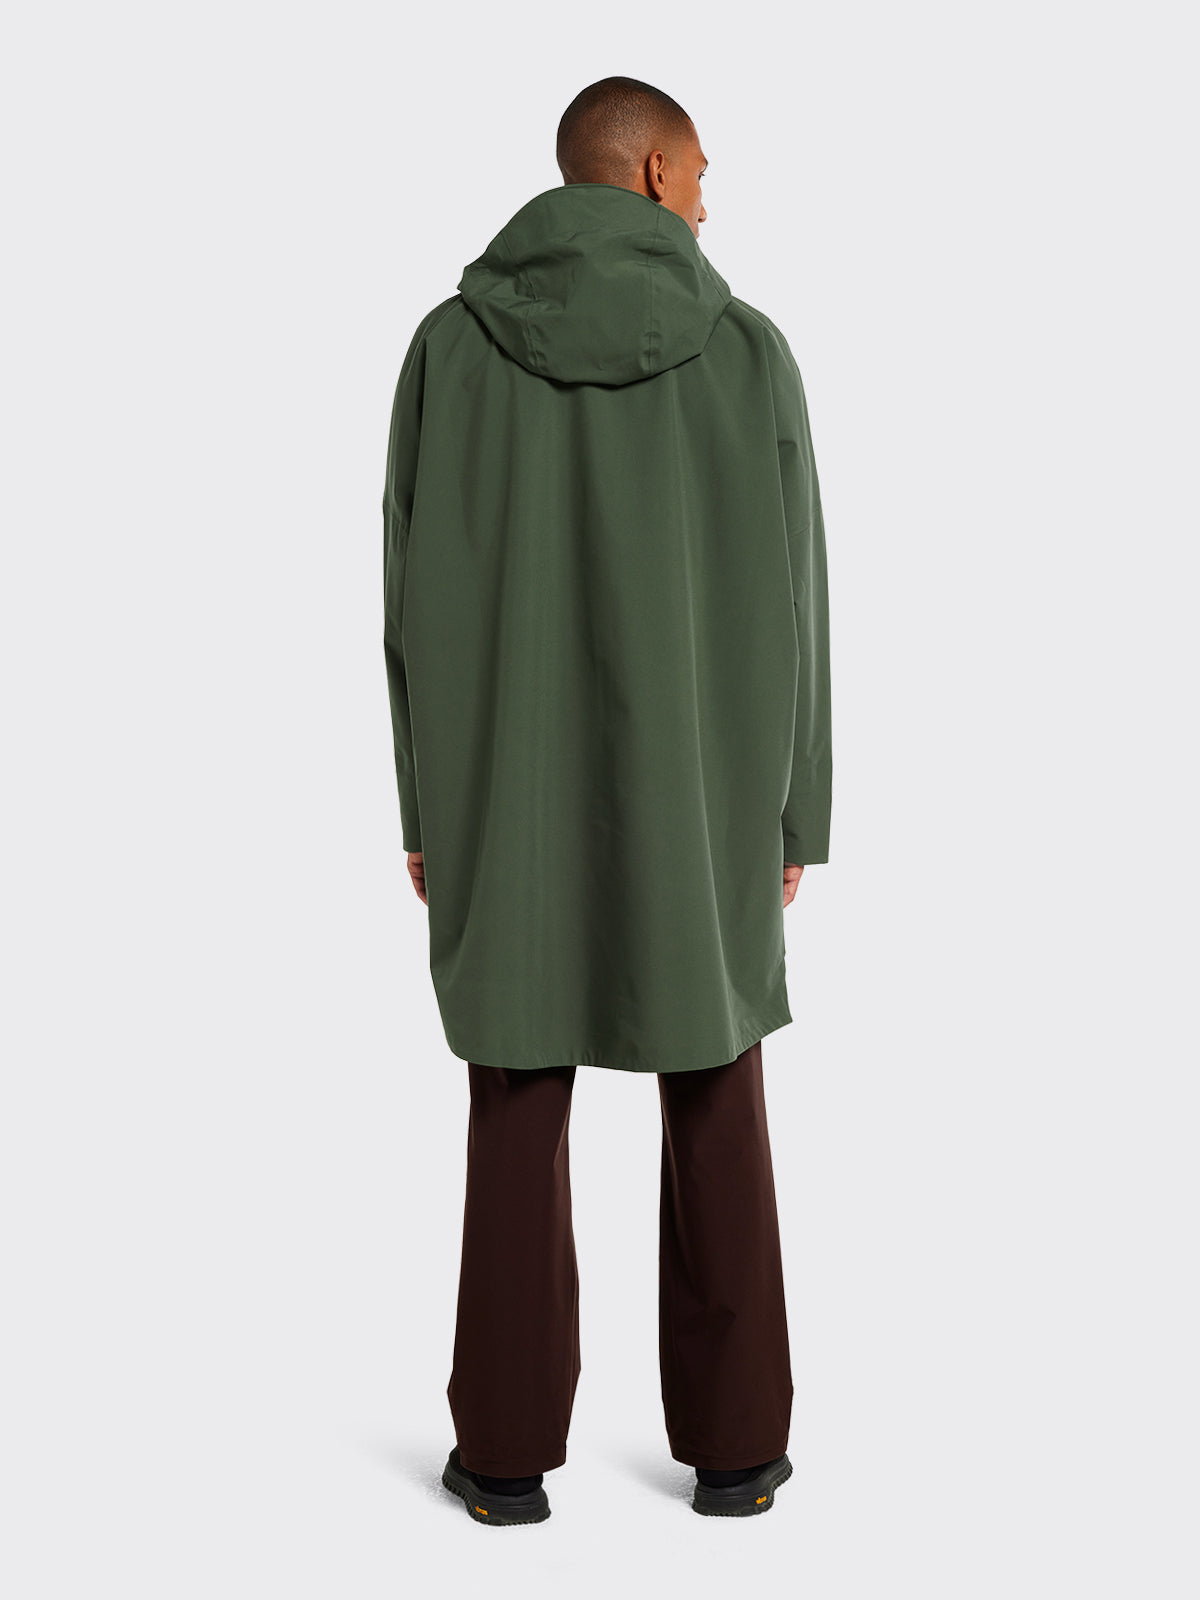 Aalesund poncho from Blæst in Dusty Green